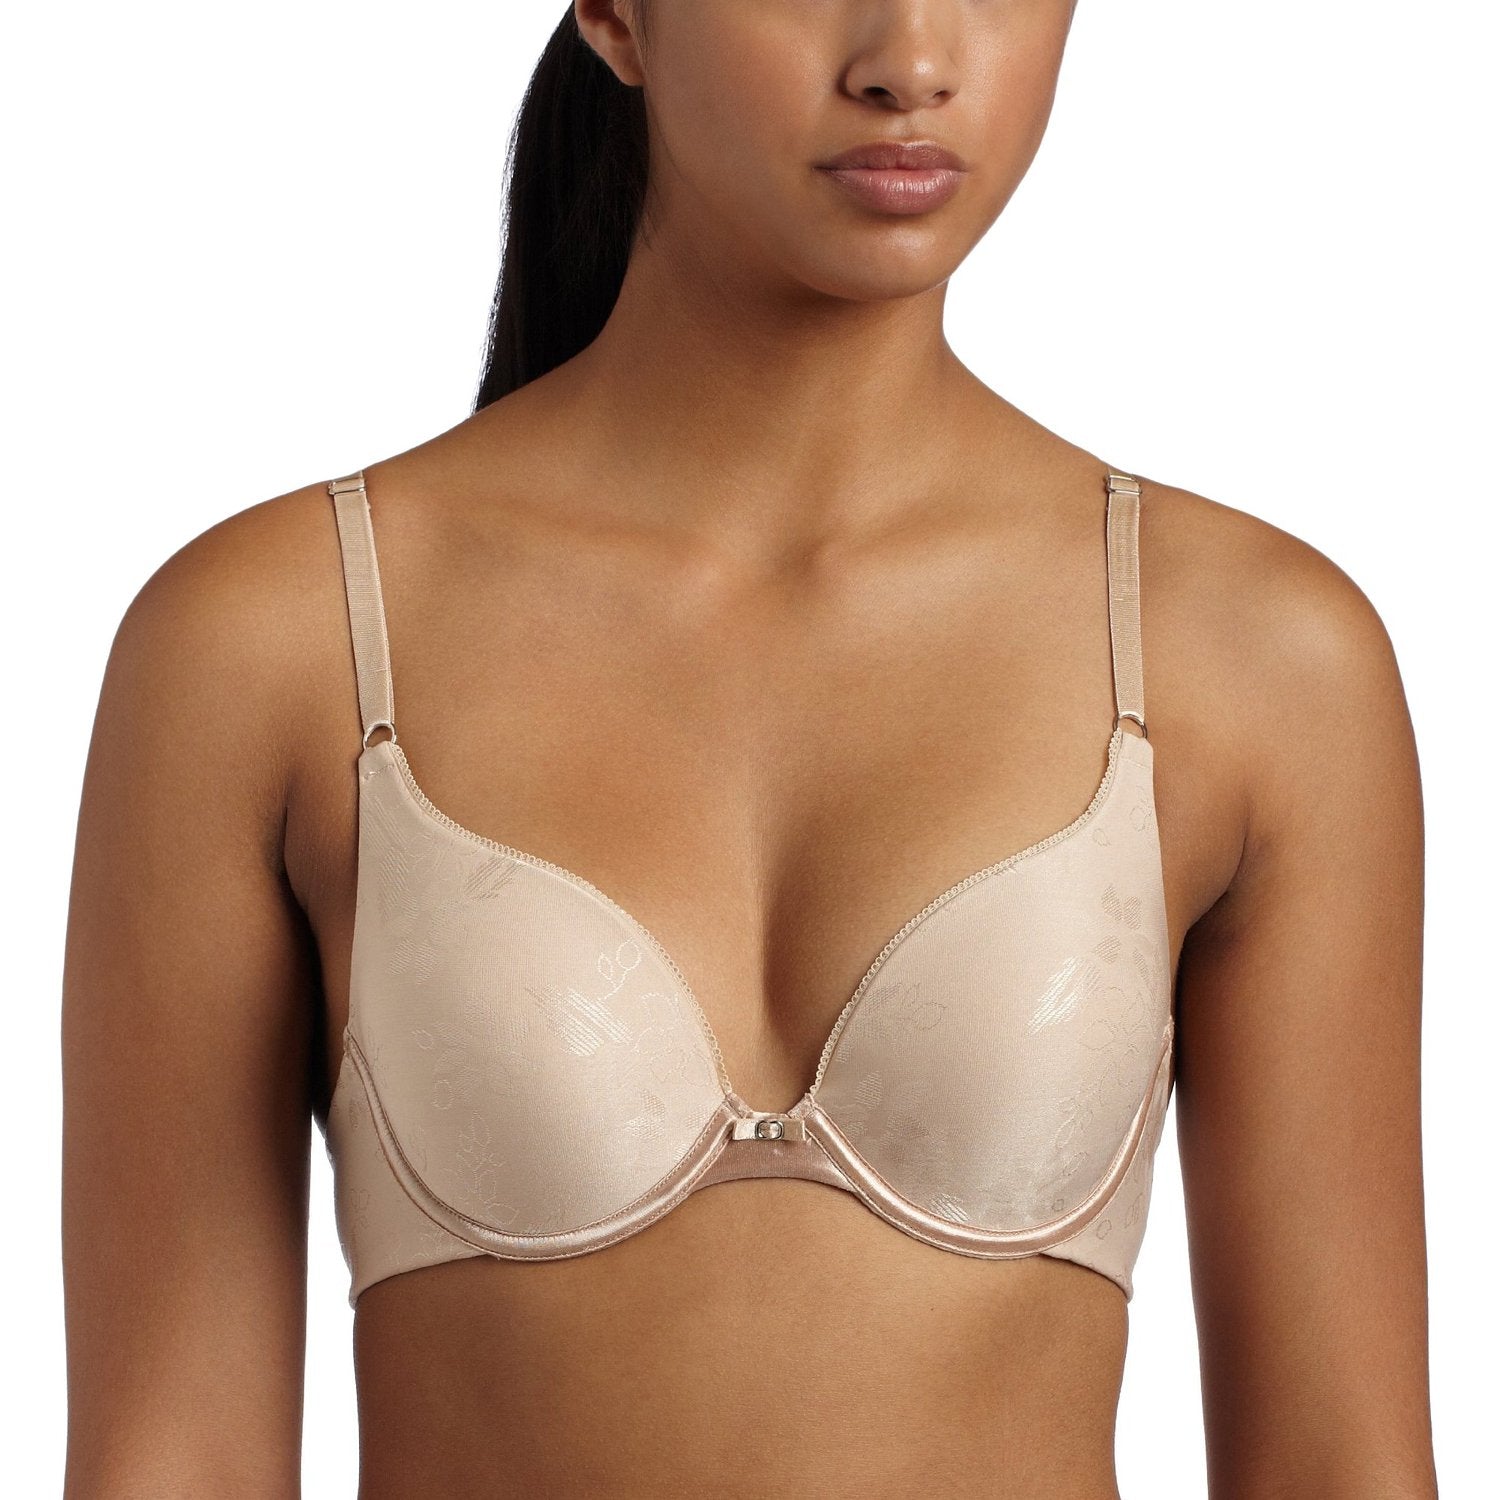 Lily of France Extreme Ego Boost Tailored Push Up Bra 2131101